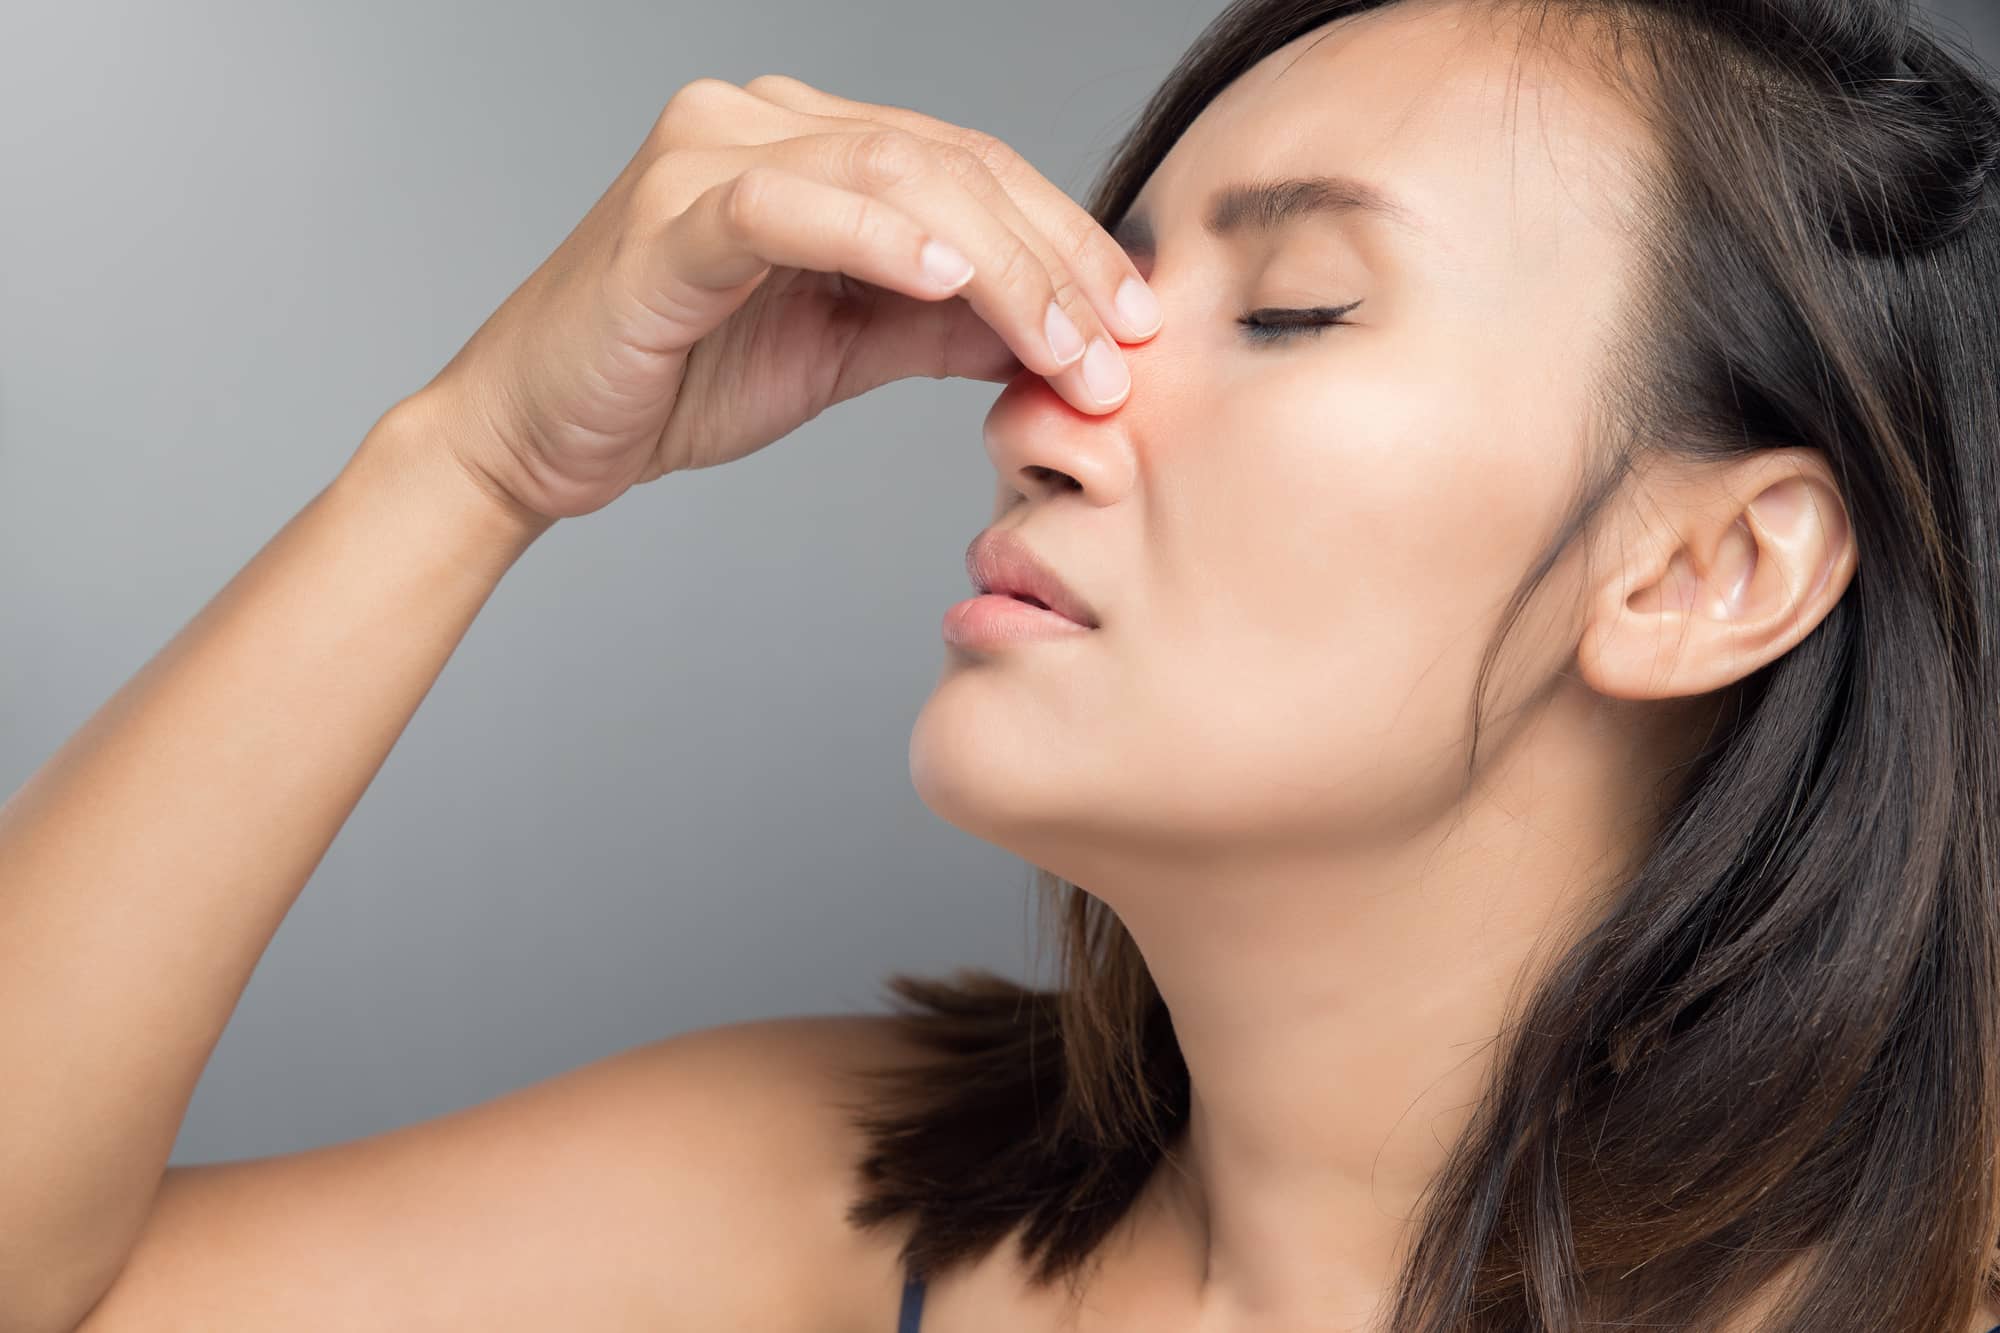 The grossest health recommendation of all time: Picking your nose and  eating it is good for you